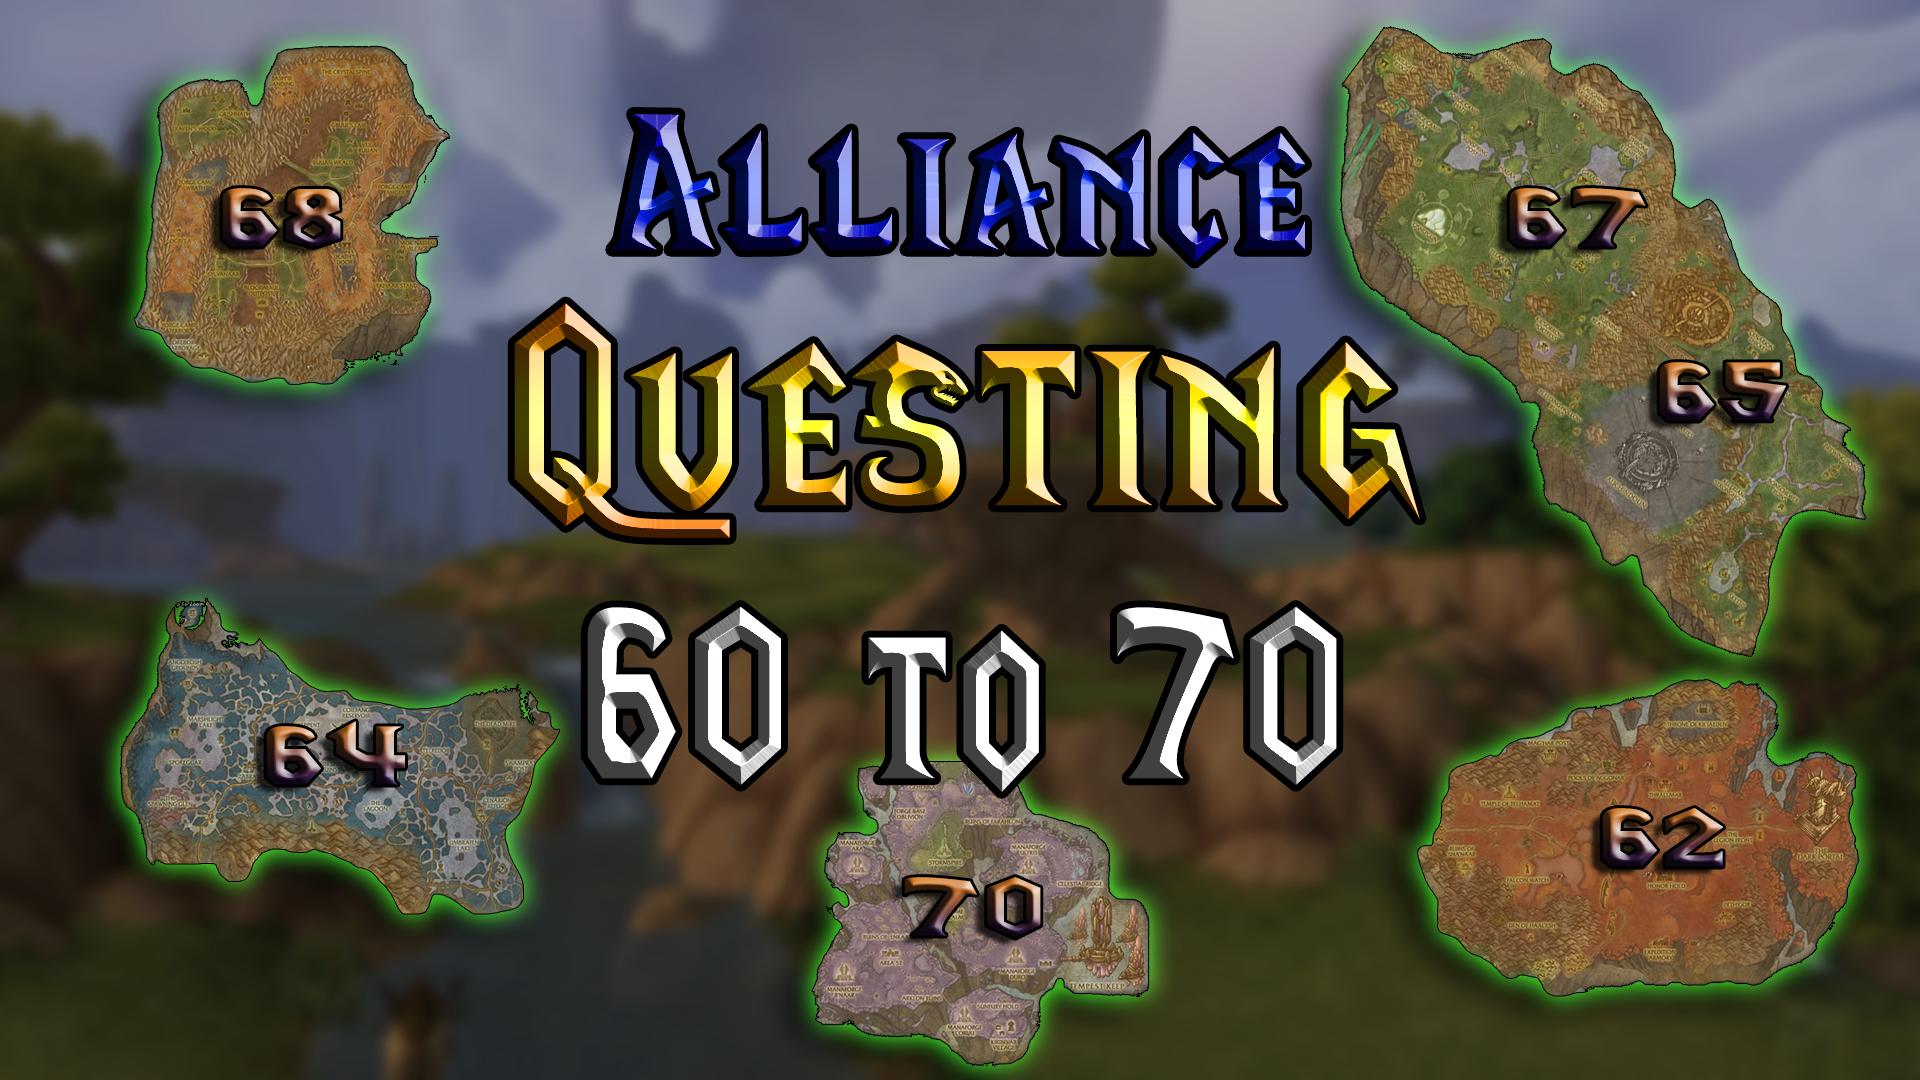 [TBC] 60 to 70 - Alliance Quester